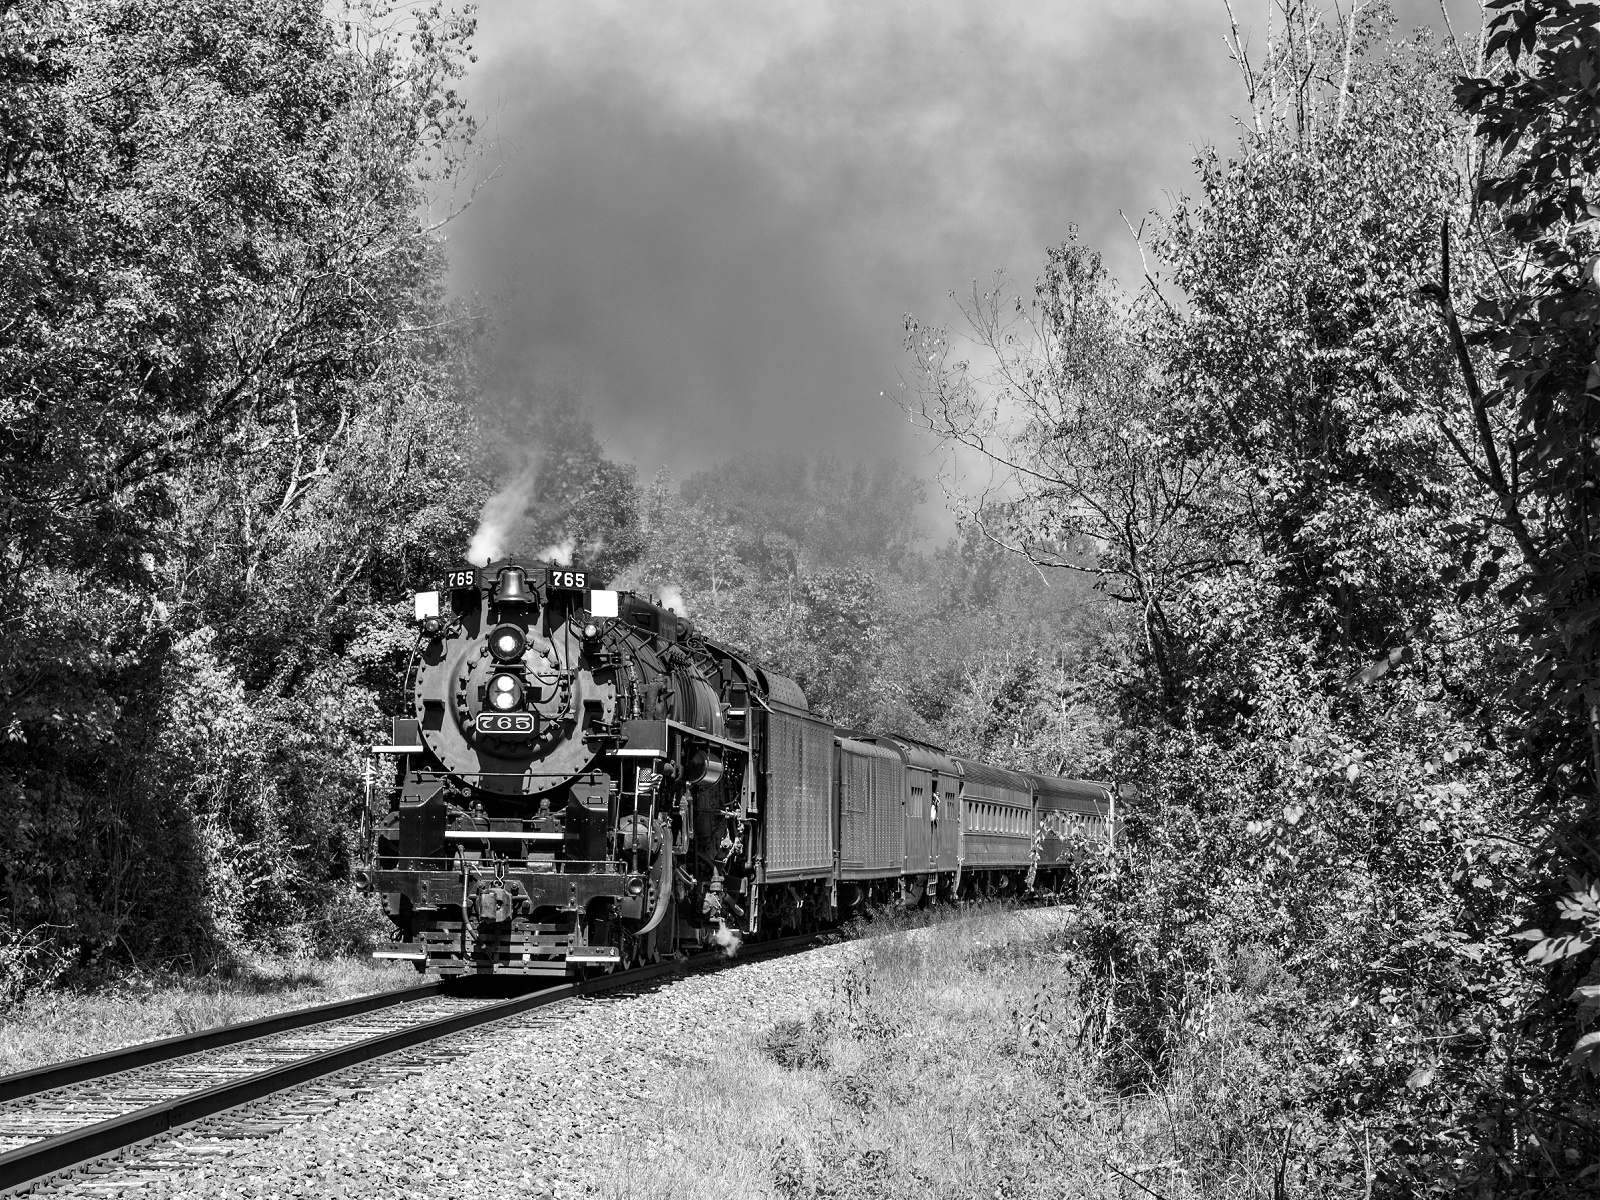 NKP 765 is a class Steam 2-8-4 and  is pictured in Cuyahoga Falls, OH, United States.  This was taken along the CVSR Mainline on the Cuyahoga Valley Scenic Railroad. Photo Copyright: David Rohdenburg uploaded to Railroad Gallery on 12/31/2022. This photograph of NKP 765 was taken on Sunday, September 19, 2021. All Rights Reserved. 